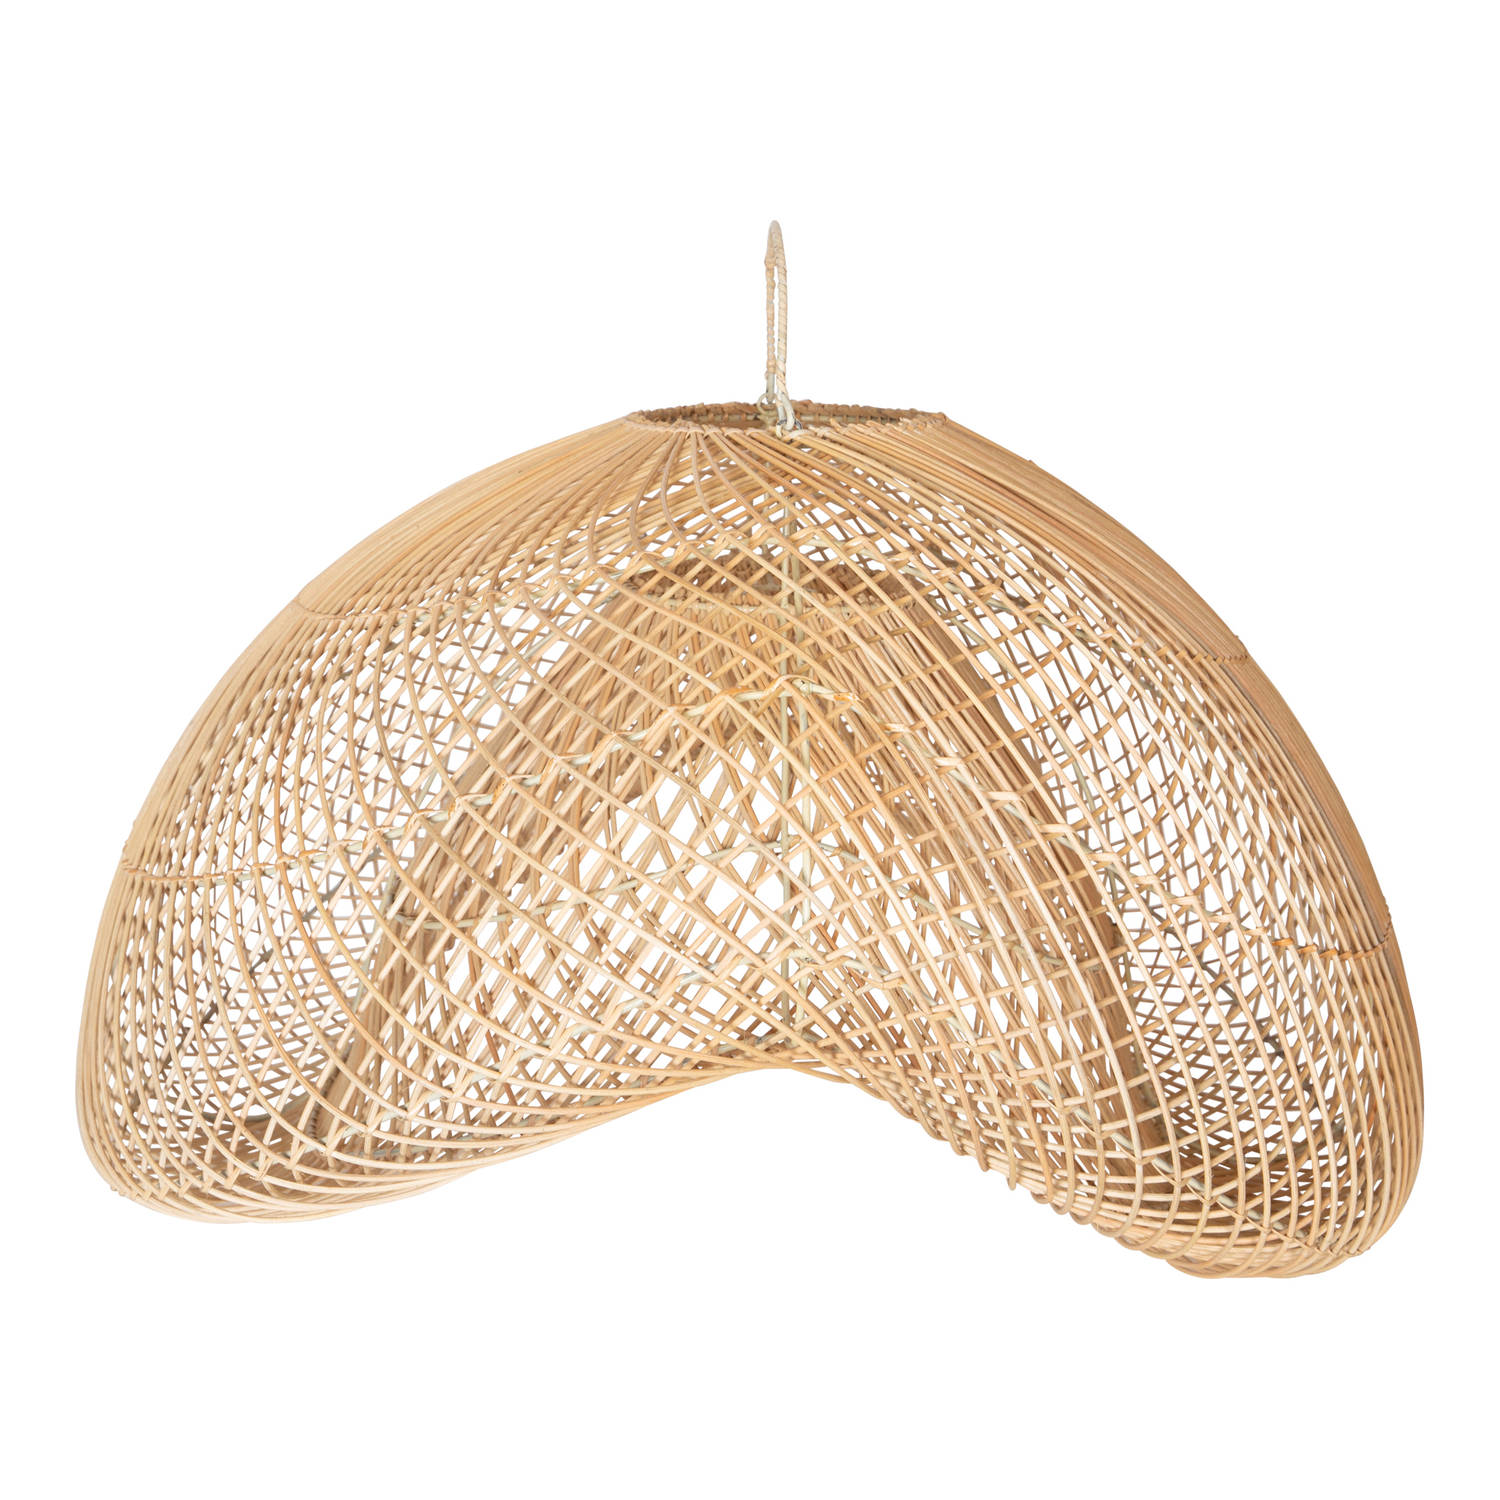 Ptmd Collection PTMD Farhi Natural rattan lampshade organic shape S